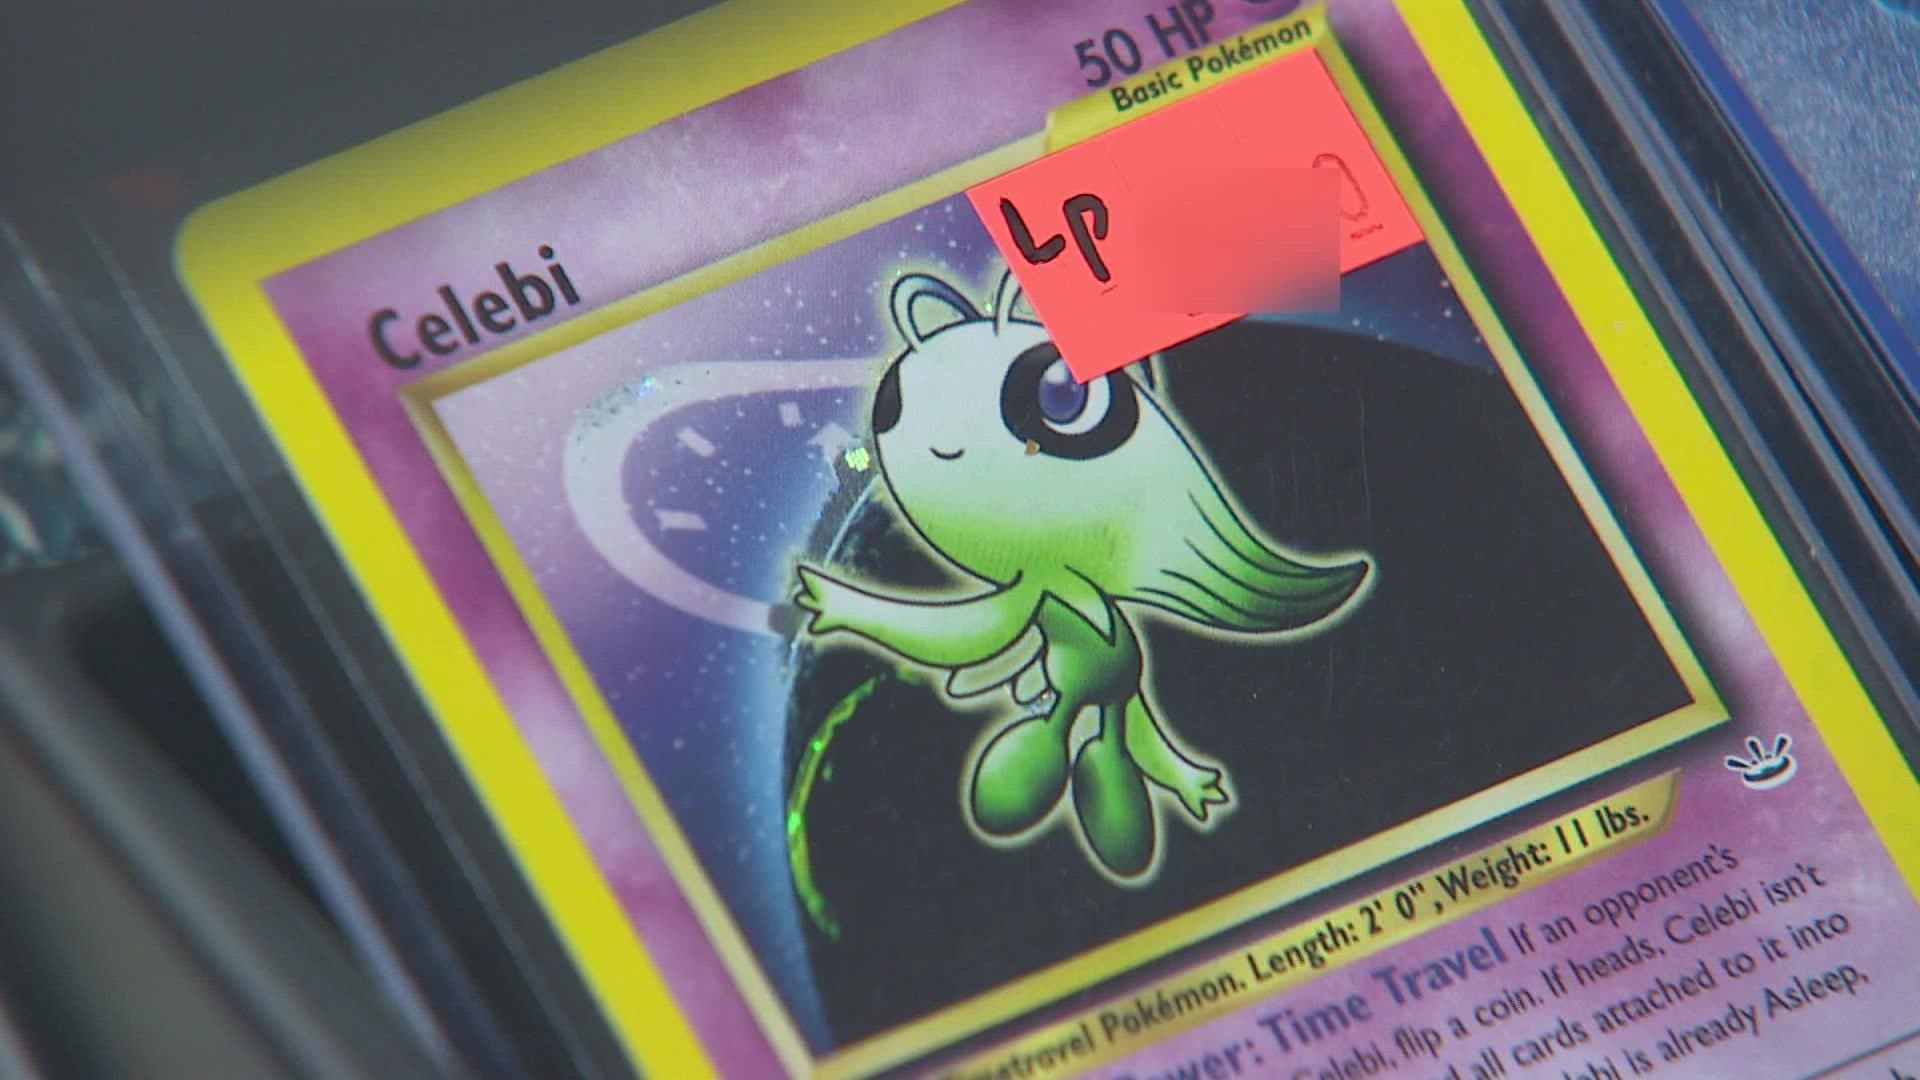 More than $8,000 in Pokemon cards, Yu-Gi-Oh cards and collectibles were stolen from Gabi's Olympic Cards and Comics, which gives out free food to those in need.